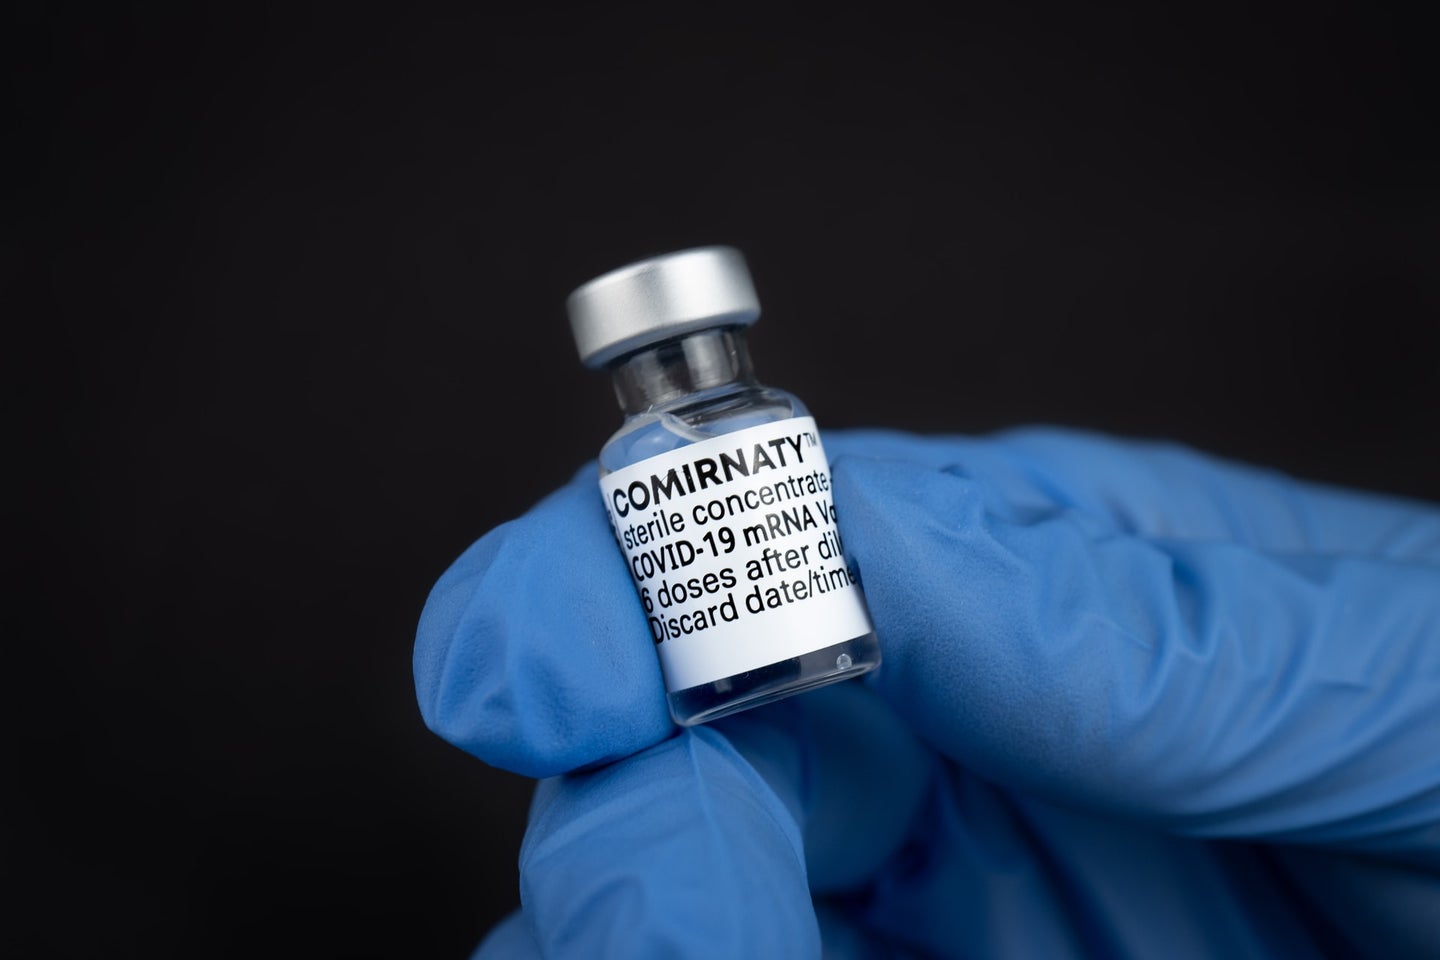 A hand in a blue glove holds a small vial labeled "Comirnaty," the new name for the Pfizer BioNTech vaccine.